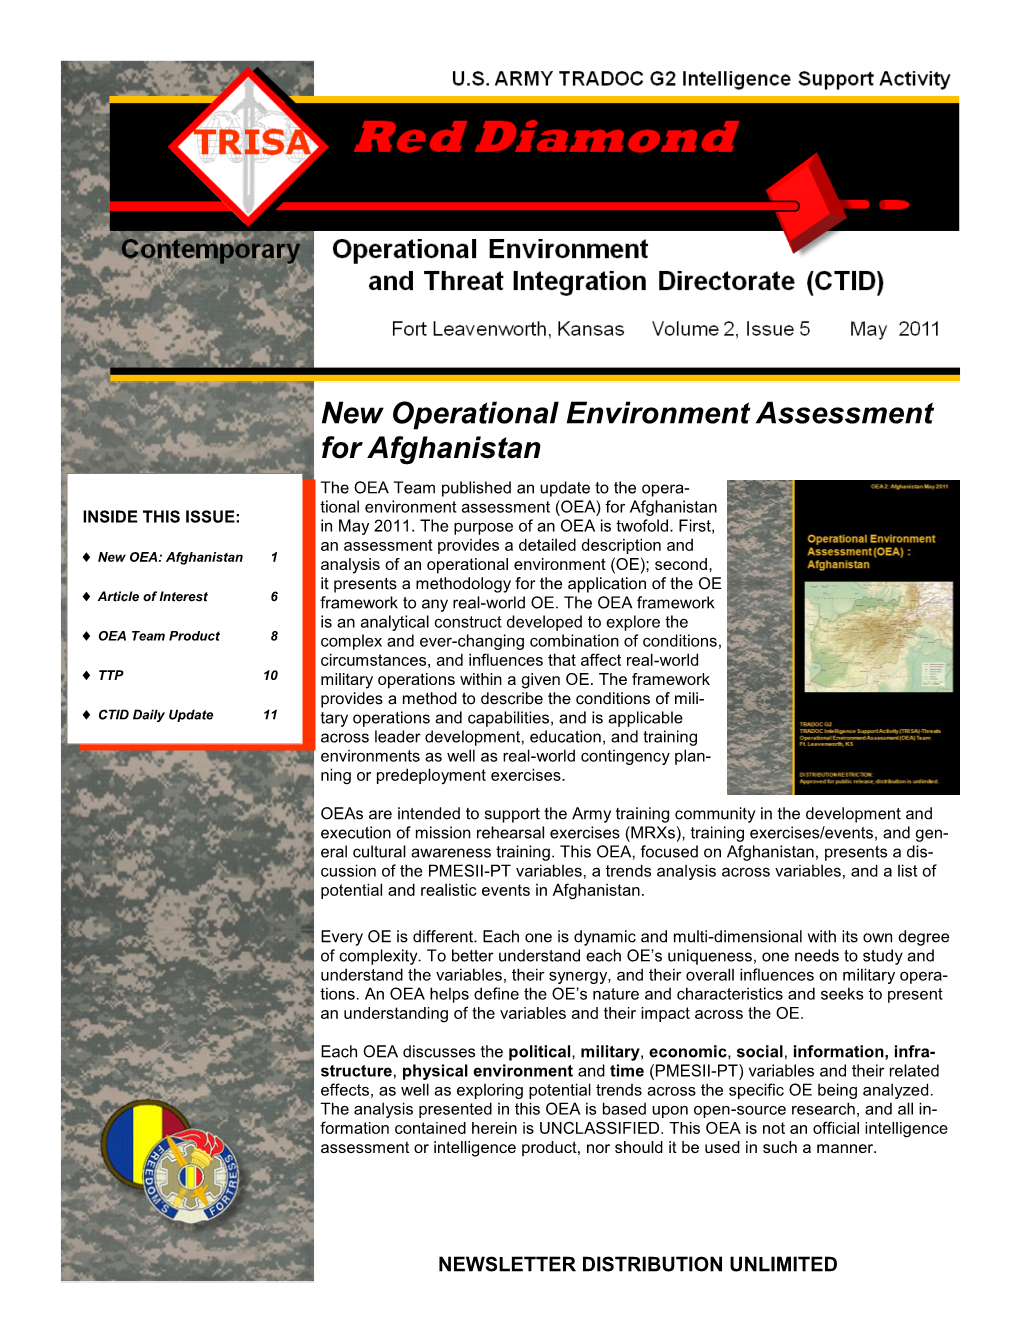 New Operational Environment Assessment for Afghanistan